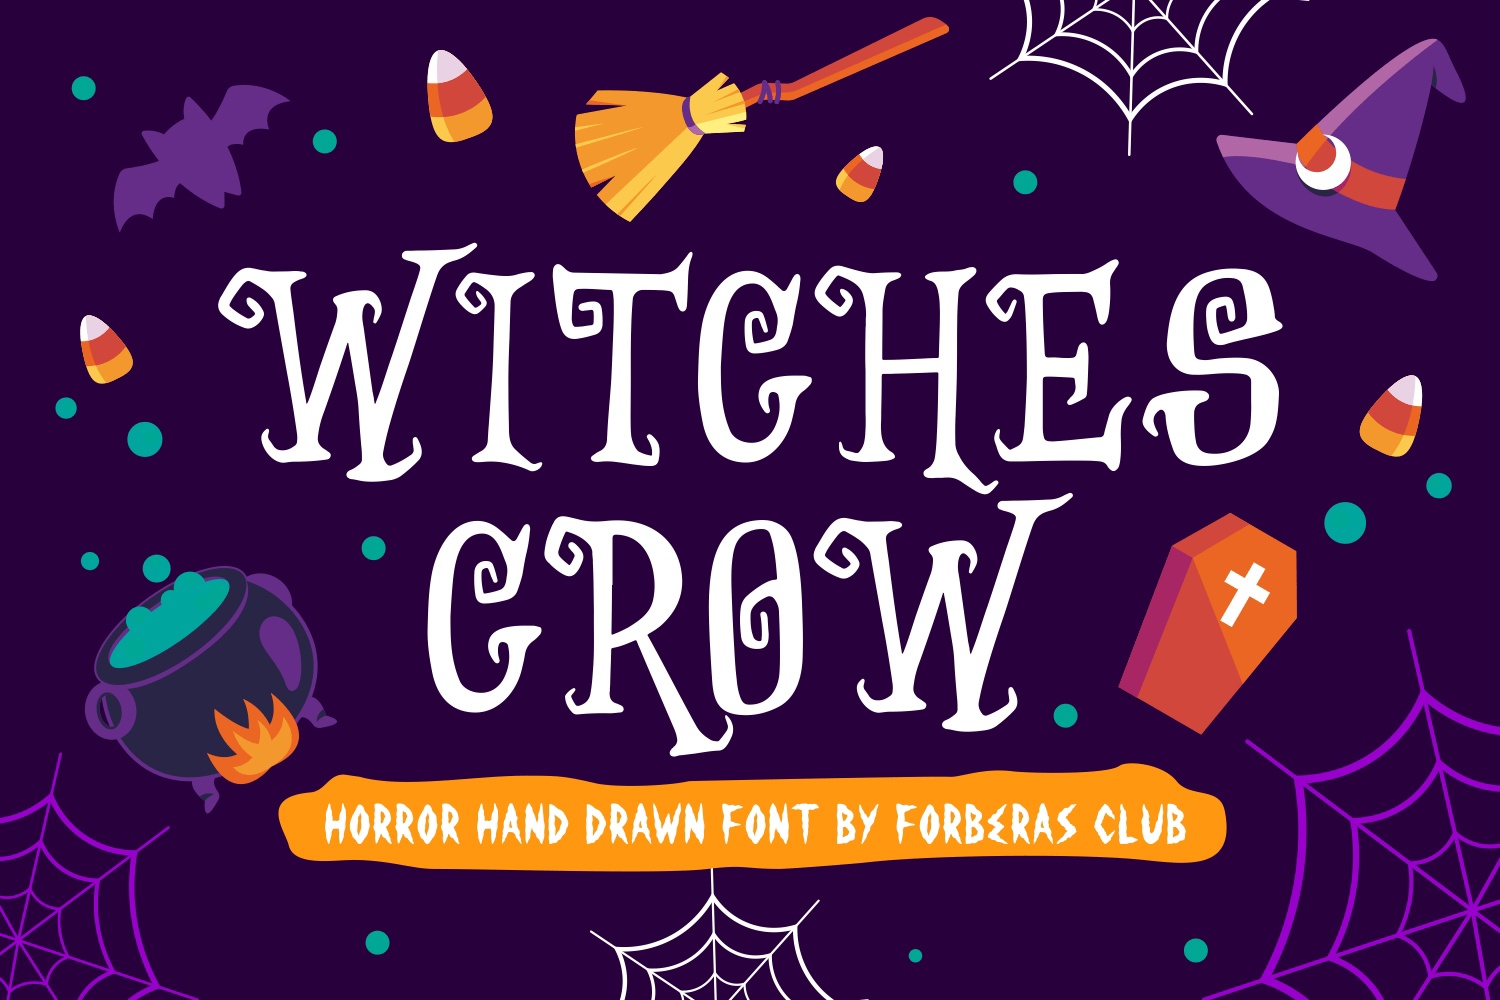 Font Witches Crow